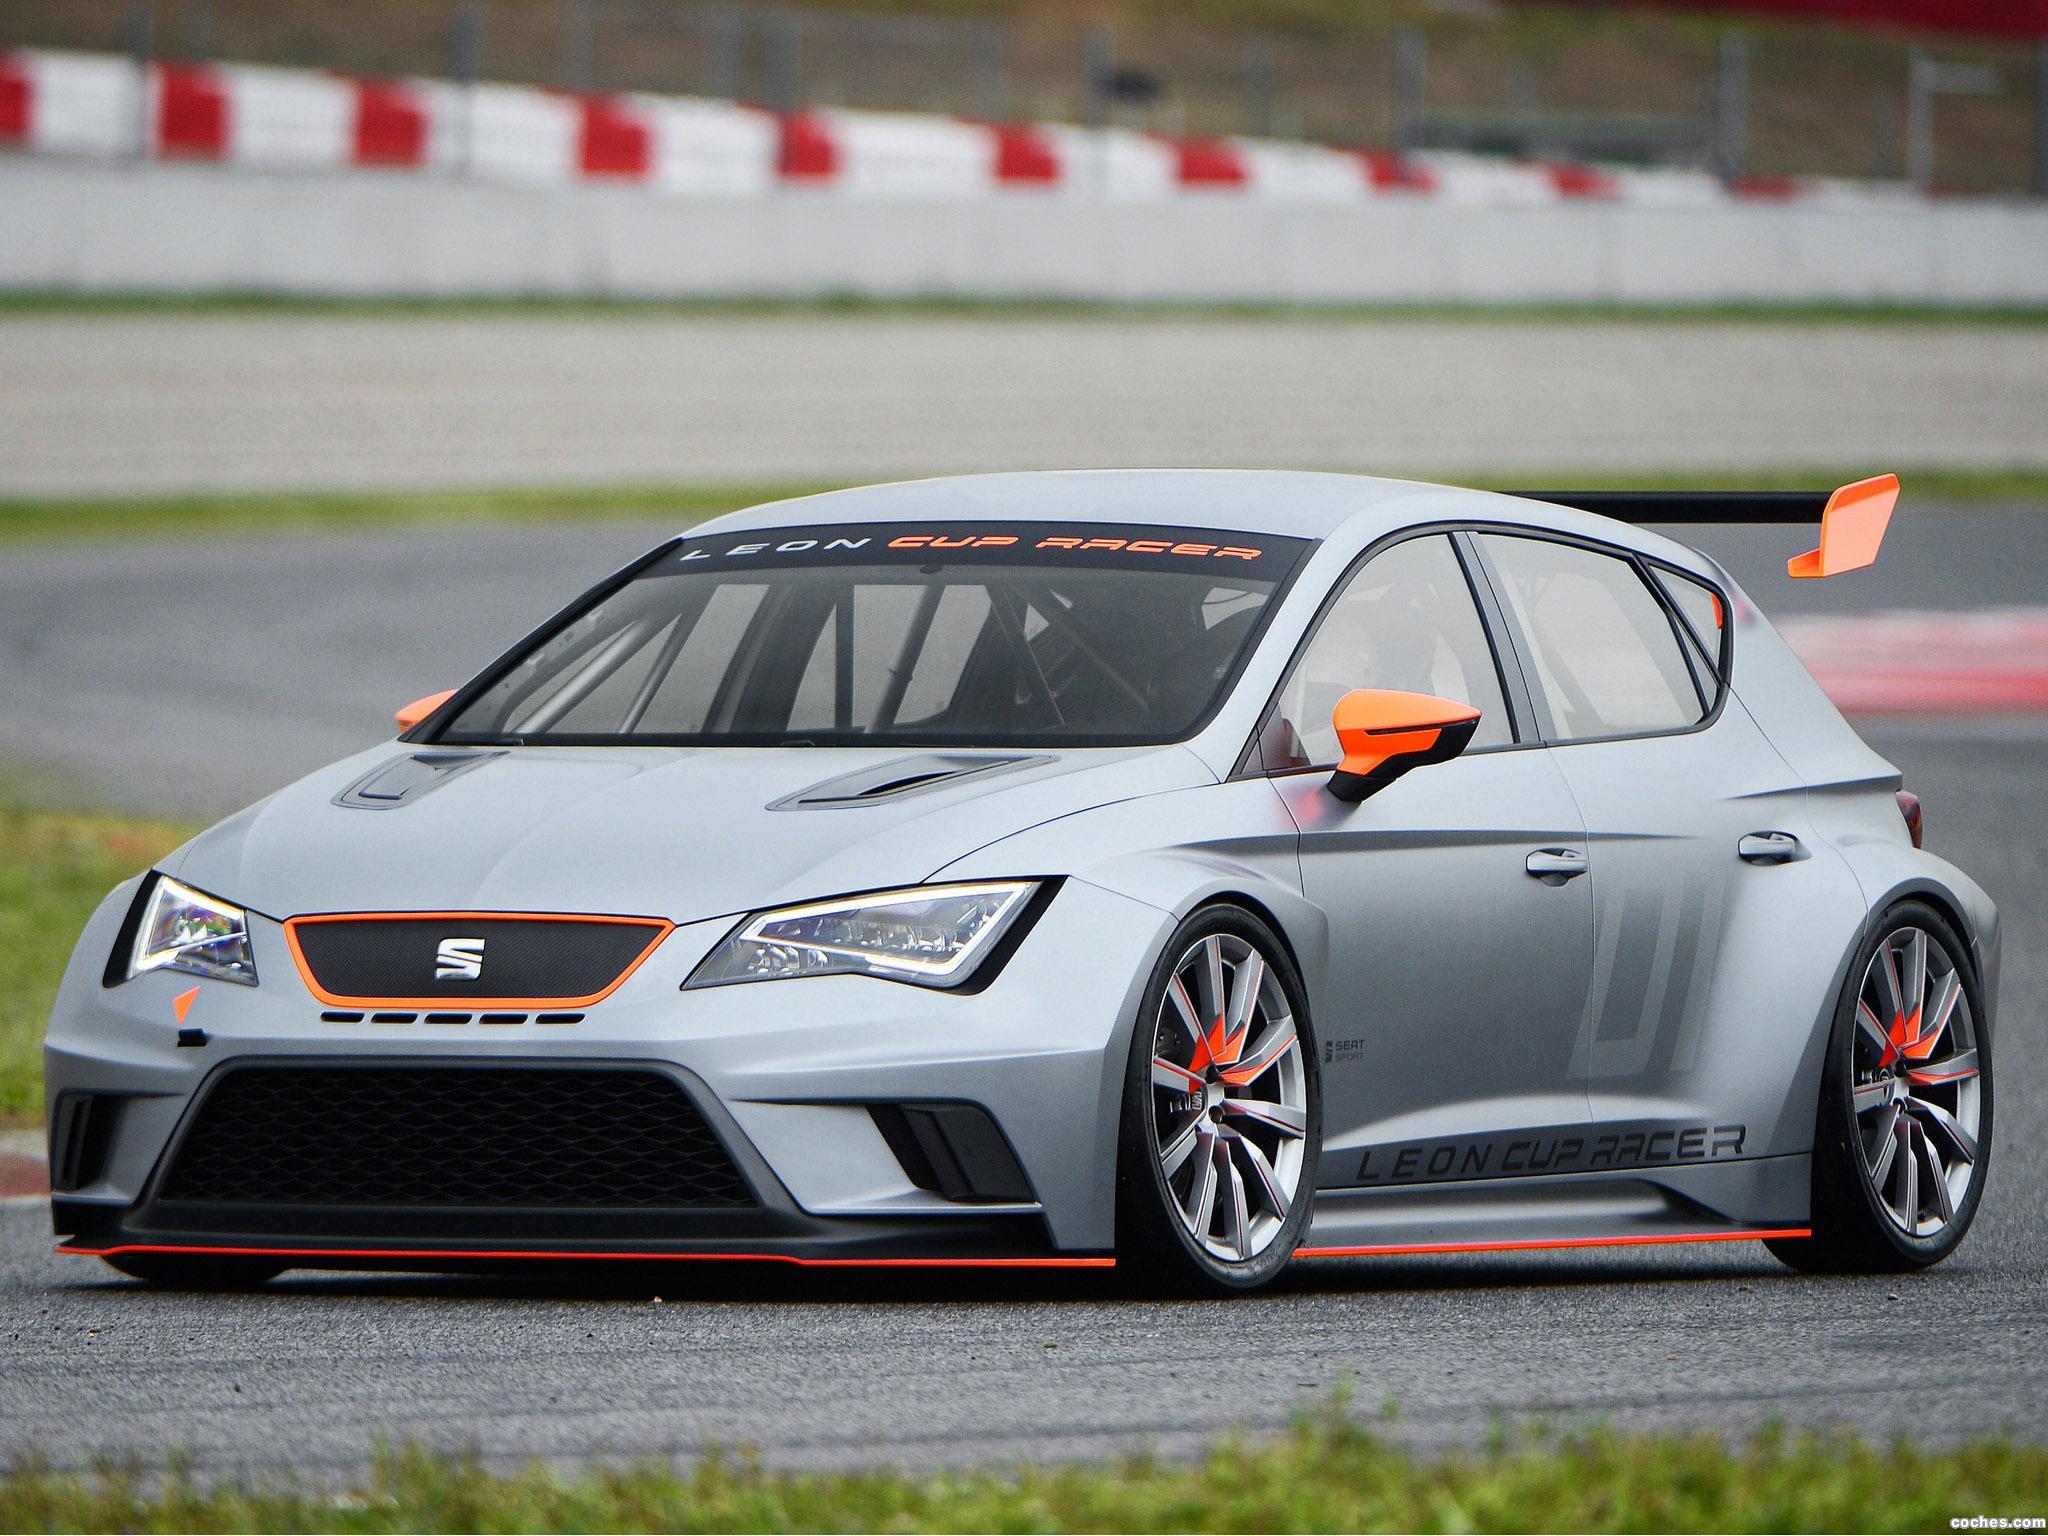 seat_leon-cup-racer-2013_r3